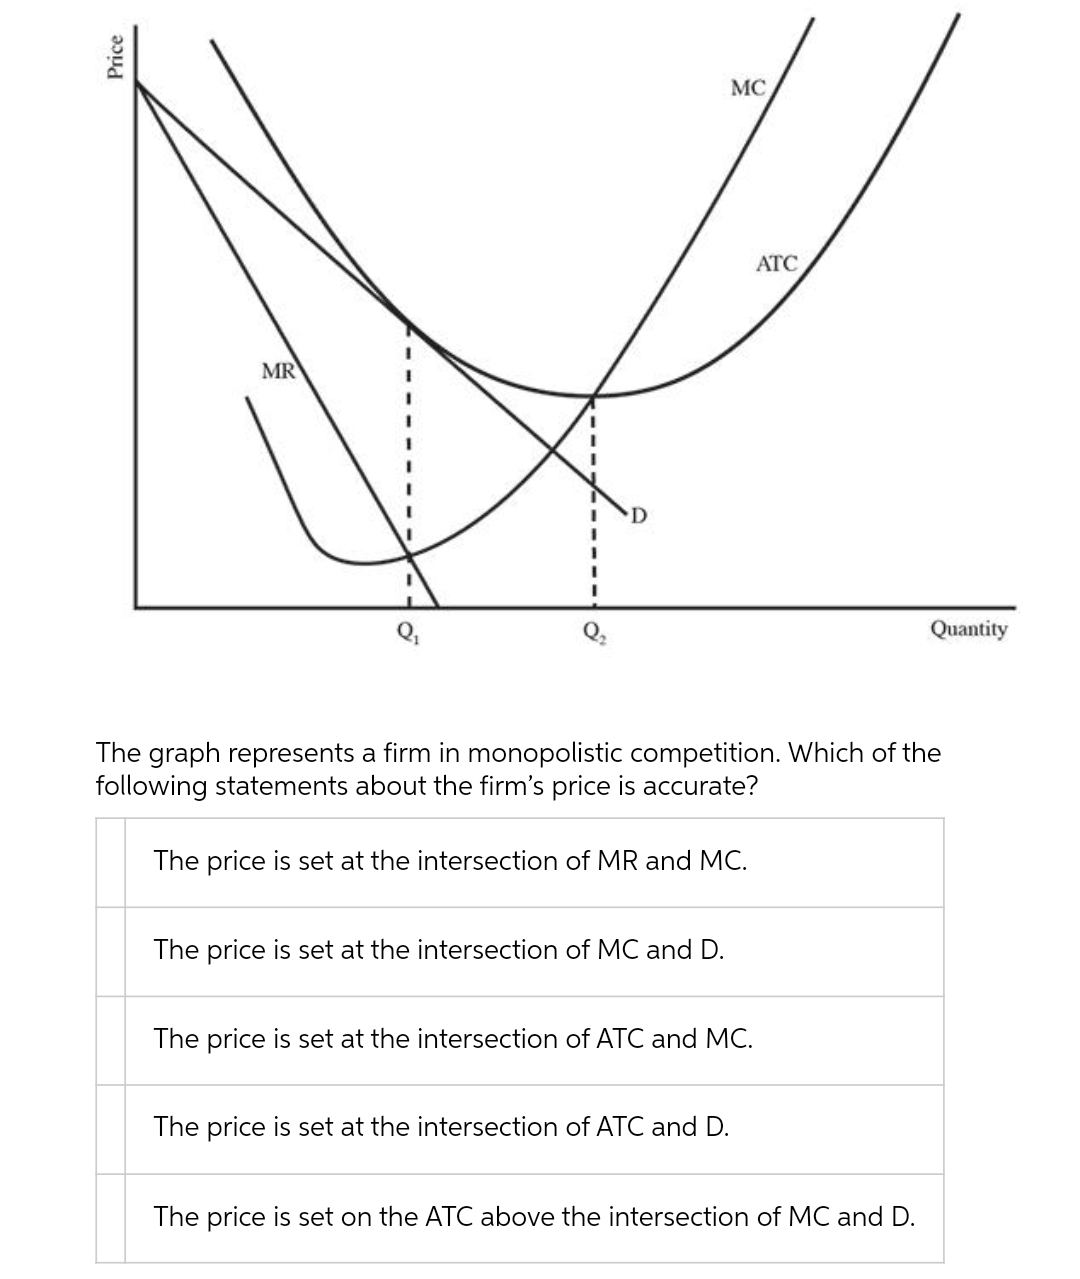 MC
ATC
MR
Quantity
The graph represents a firm in monopolistic competition. Which of the
following statements about the firm's price is accurate?
The price is set at the intersection of MR and MC.
The price is set at the intersection of MC and D.
The price is set at the intersection of ATC and MC.
The price is set at the intersection of ATC and D.
The price is set on the ATC above the intersection of MC and D.
Price
